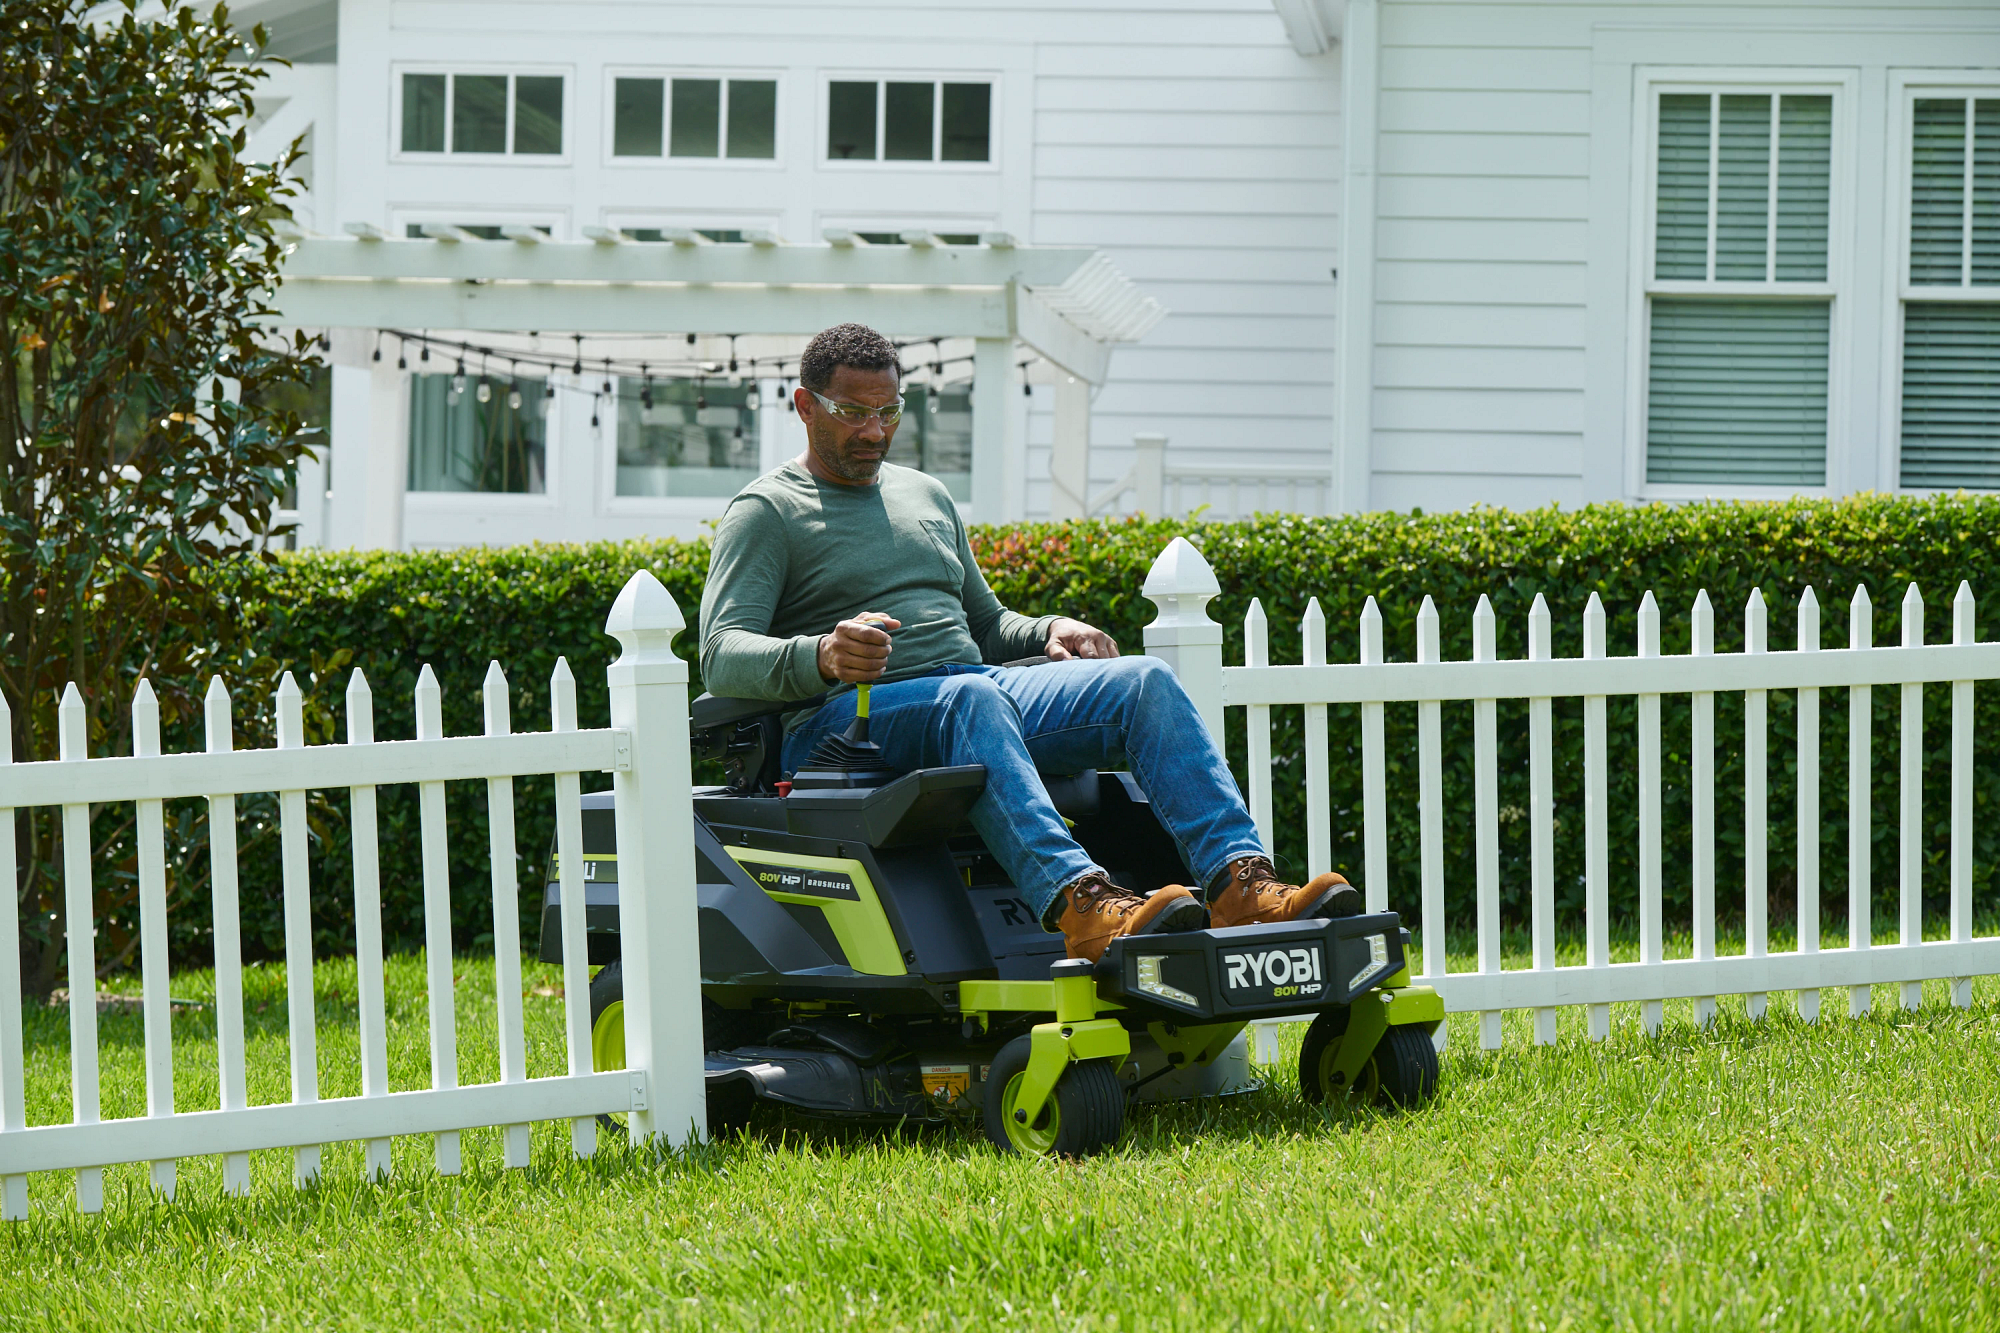 Product Features Image for 80V HP BRUSHLESS 30" LITHIUM ELECTRIC ZERO TURN RIDING MOWER.